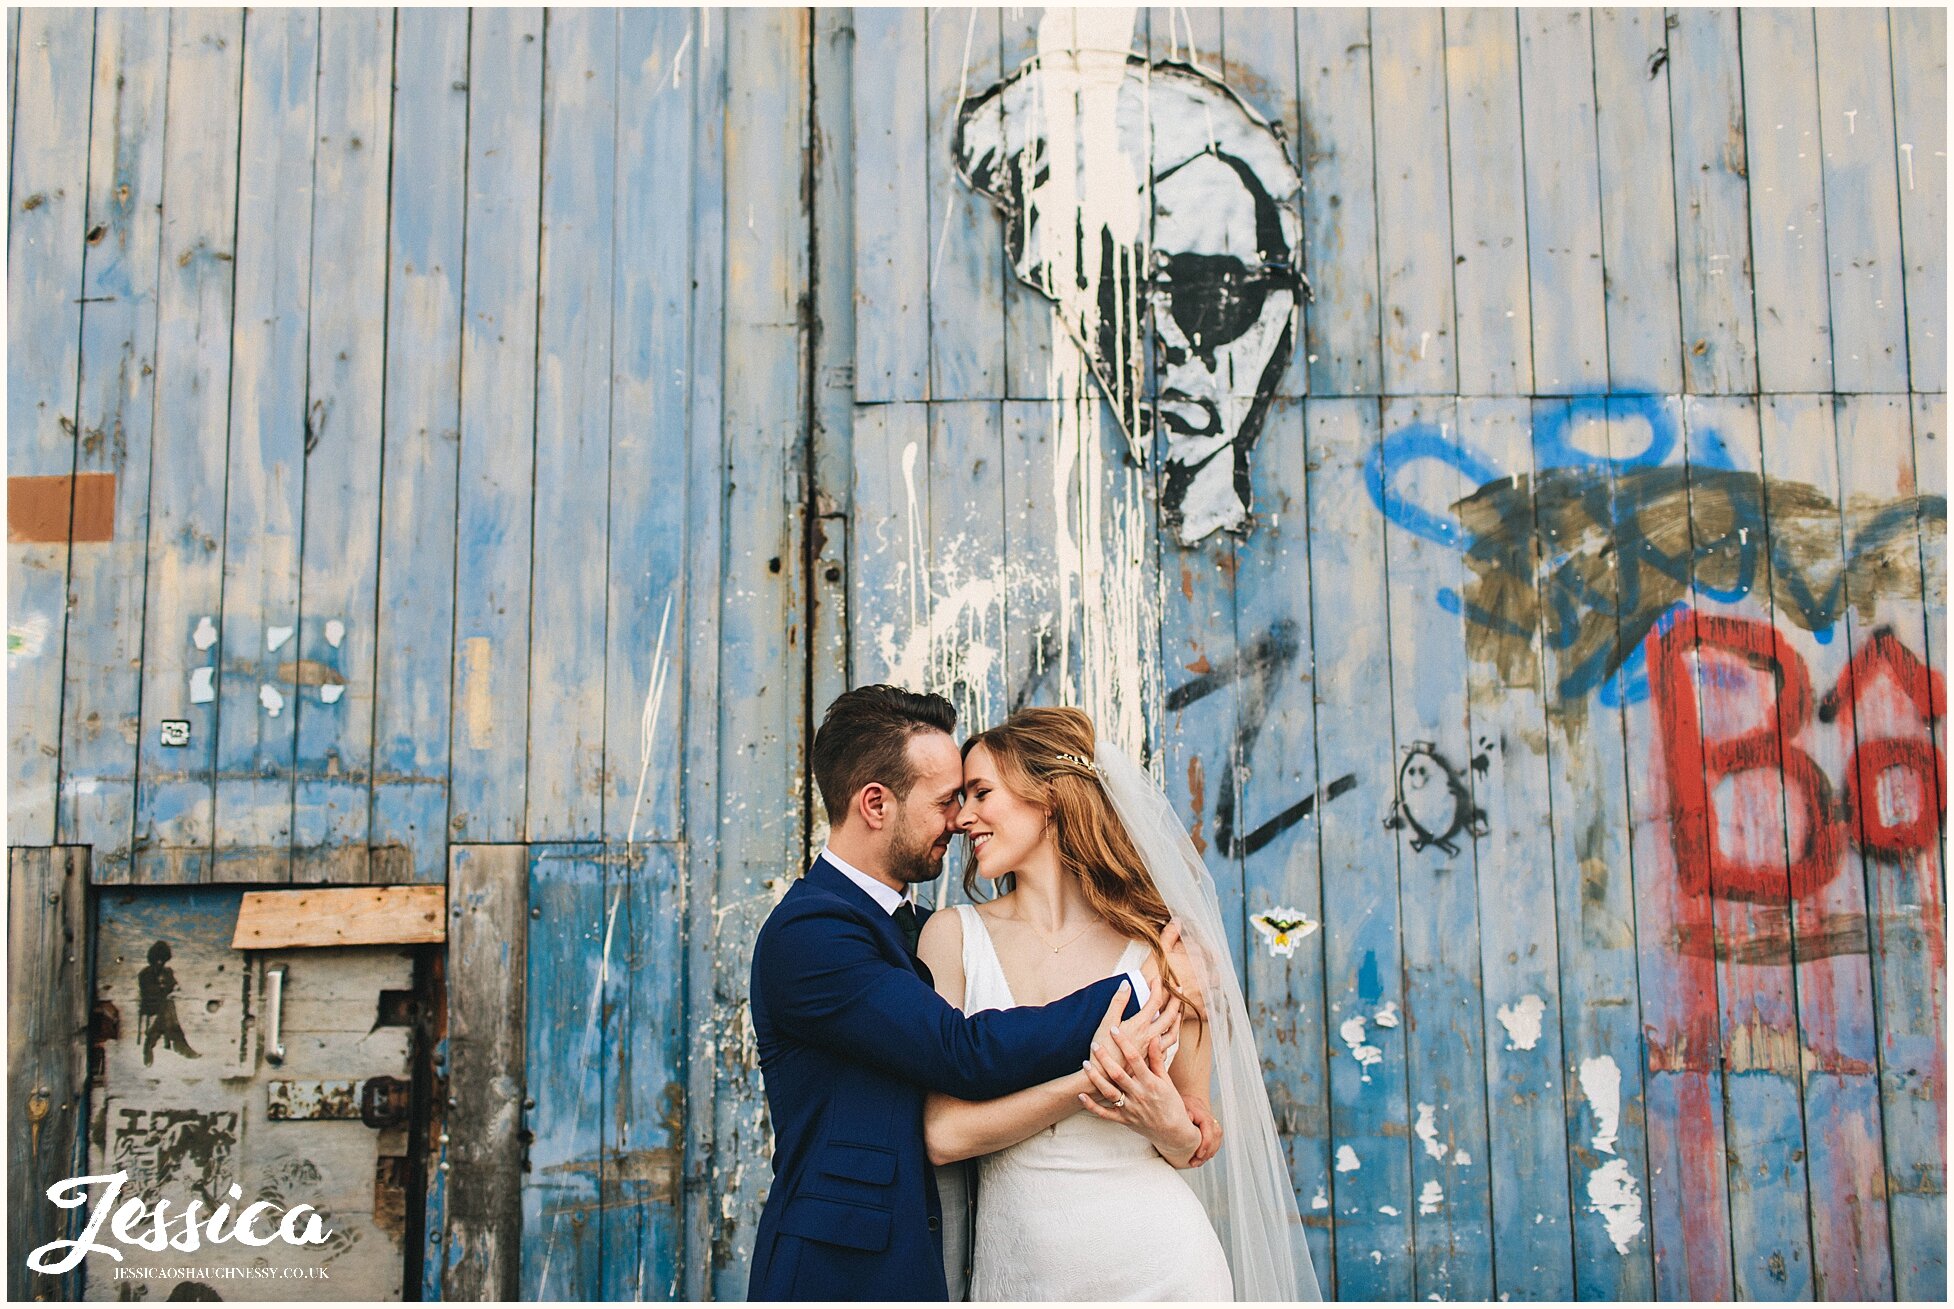 newly wed's embrace in front of blue graffitied door